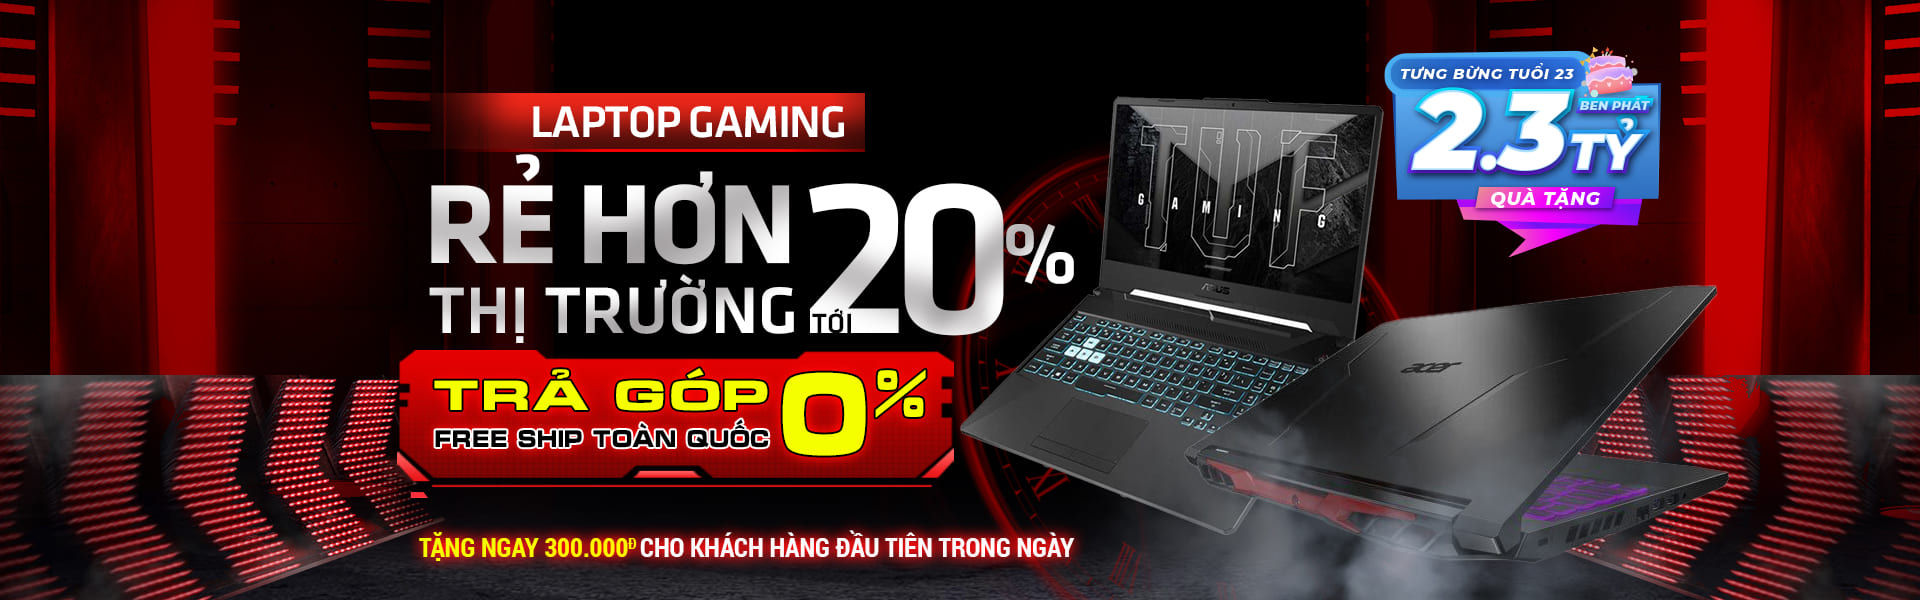 1920x600 anh head laptop gaming 2 1